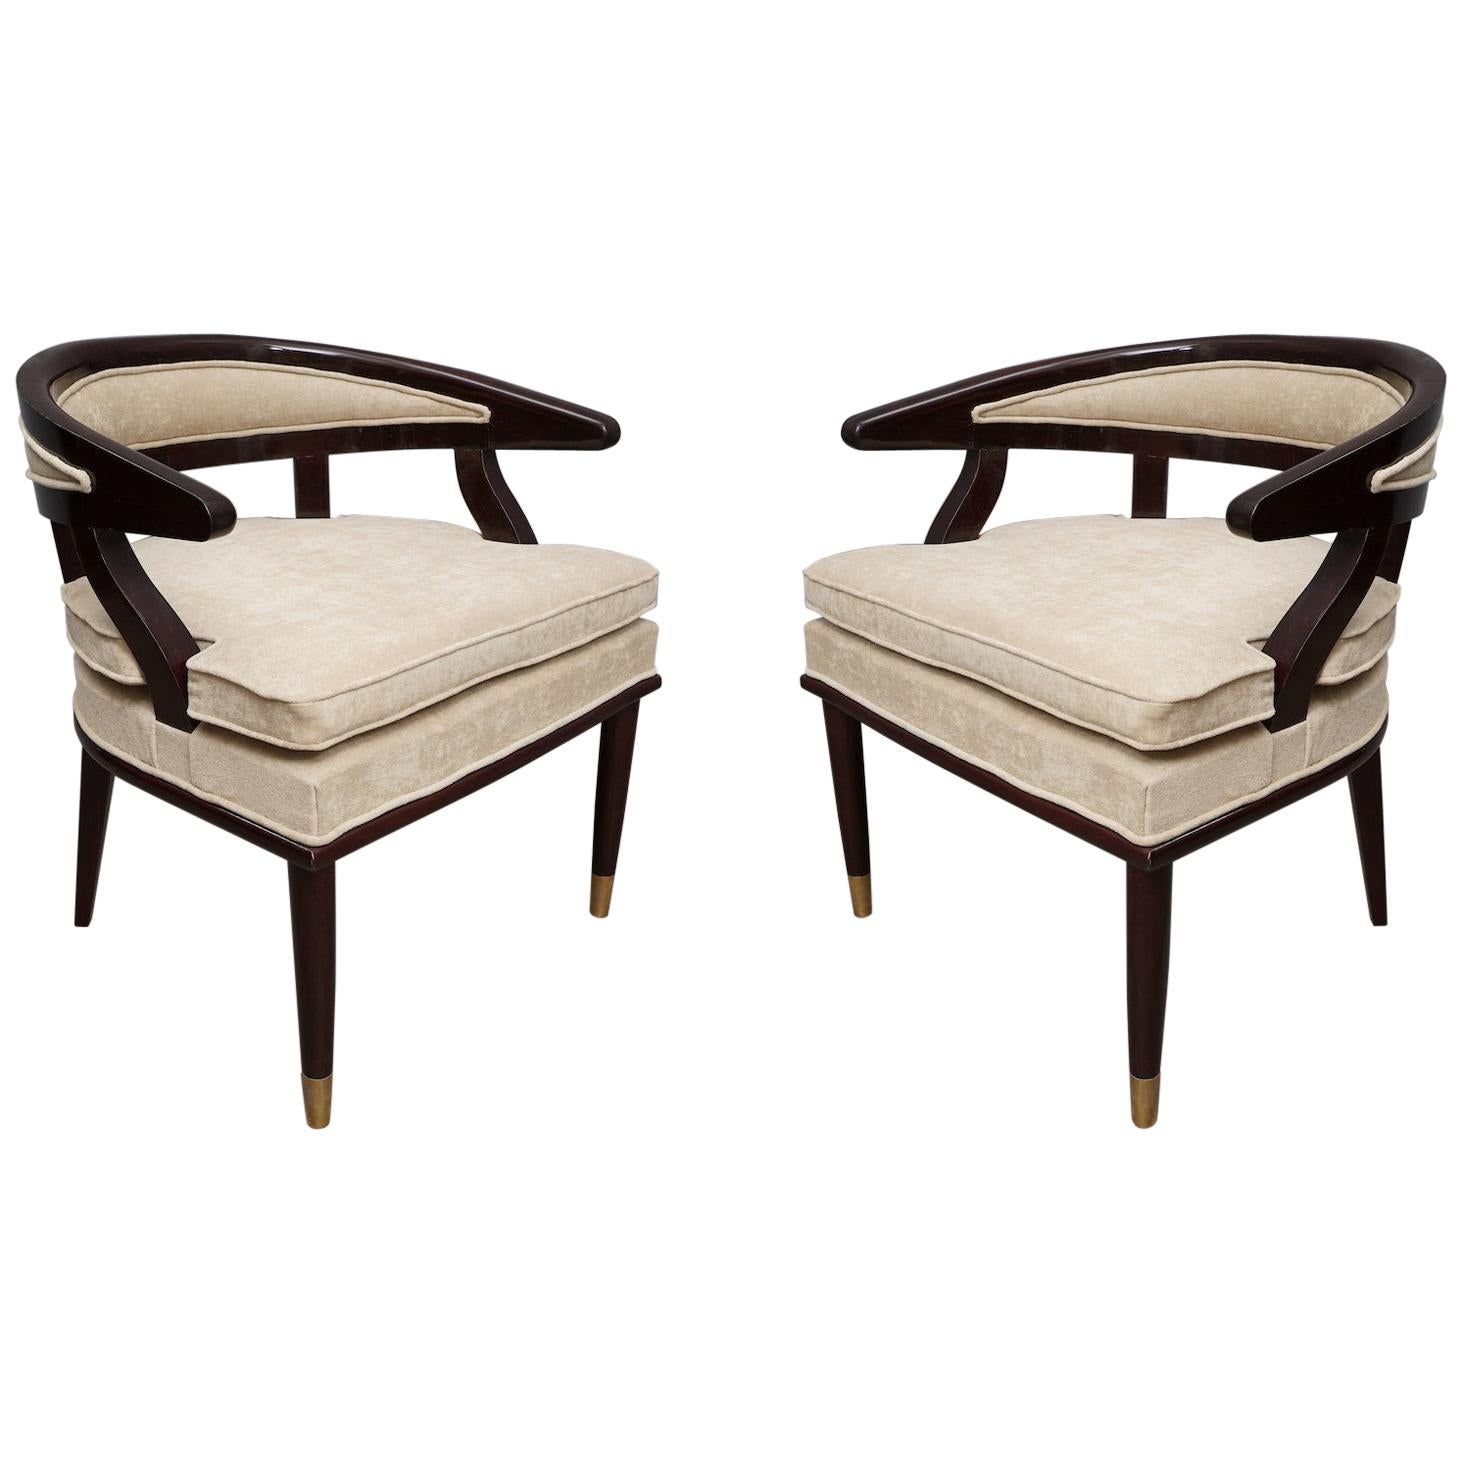 Pair of Art Deco Wood and Brass Italian Armchairs, 1920